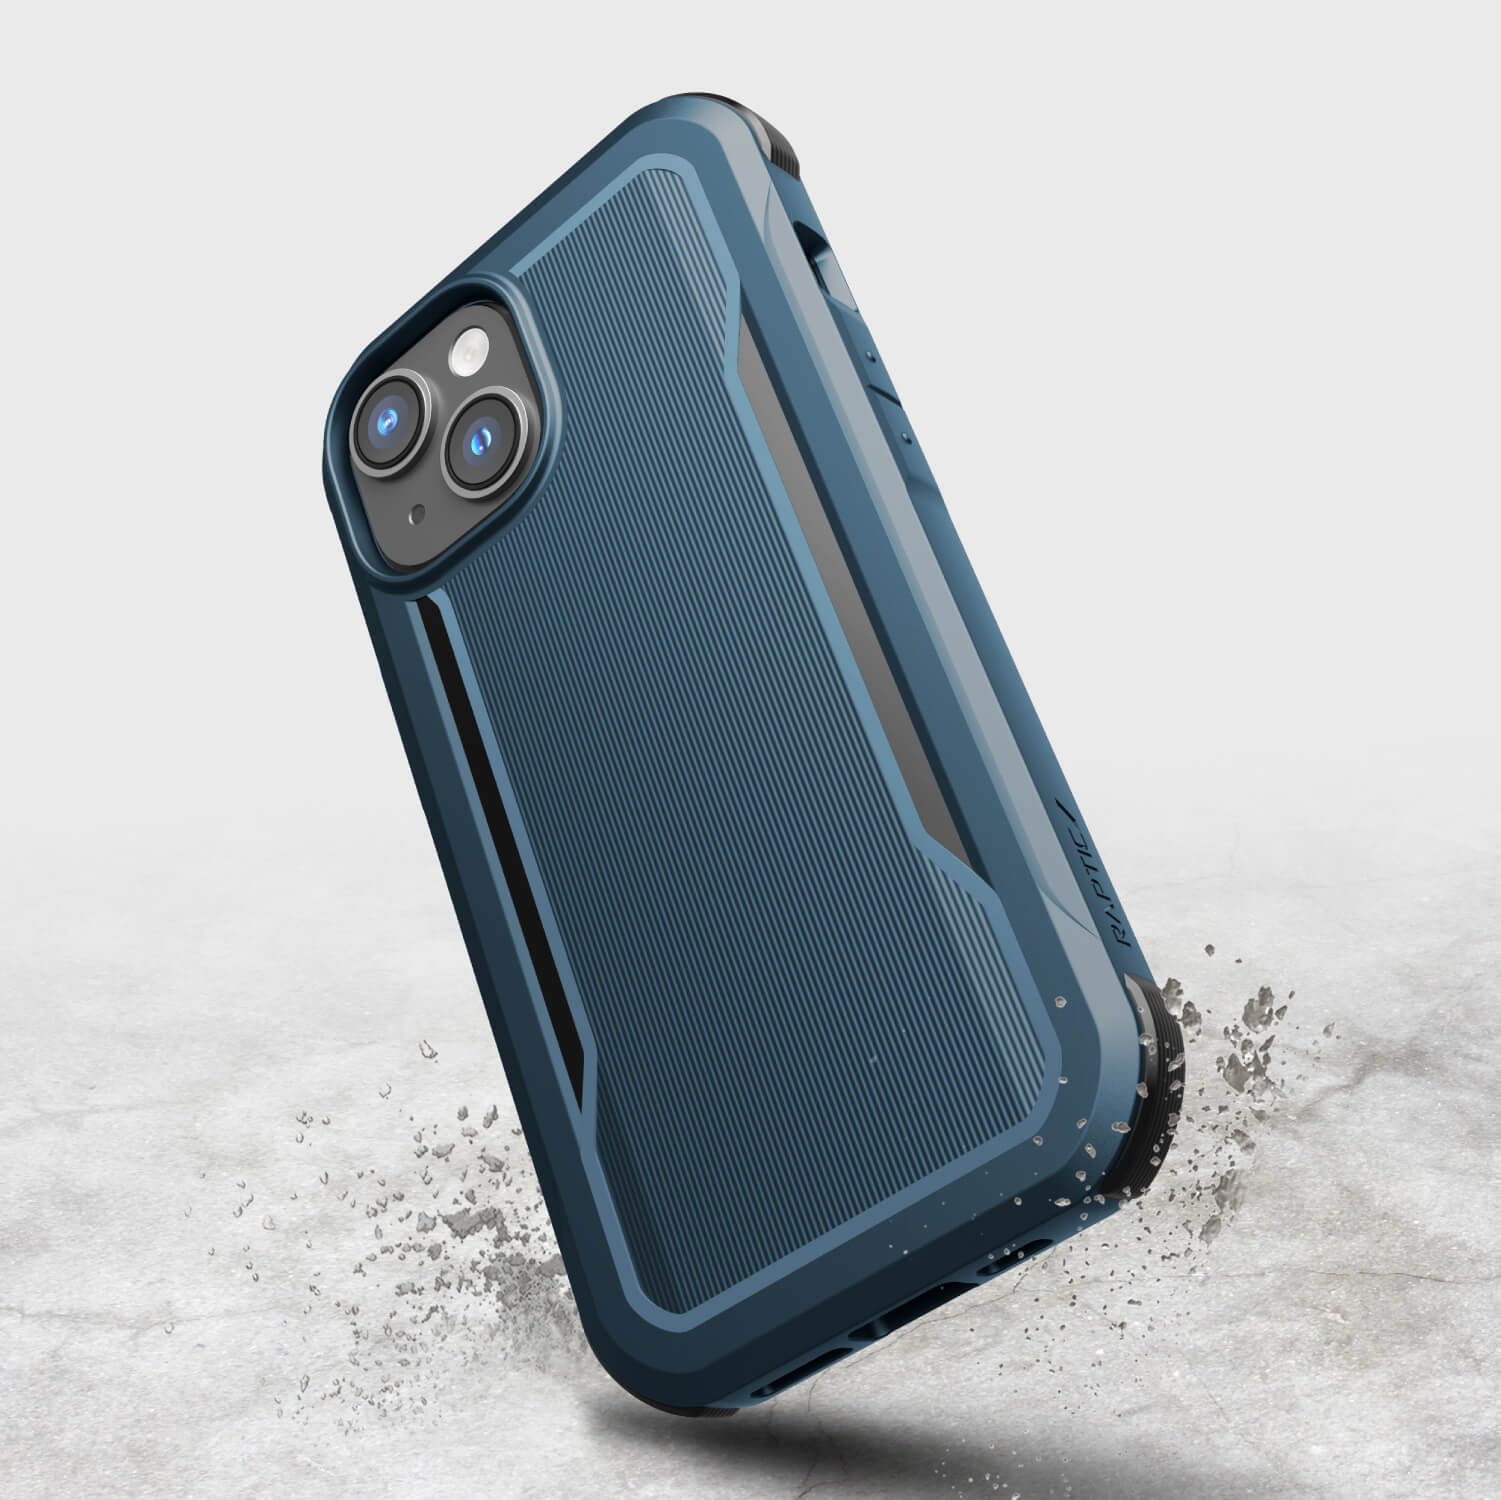 The blue iPhone 14 case - Fort Built for MagSafe, provided by Raptic, provides MagSafe compatibility and military-grade drop protection.